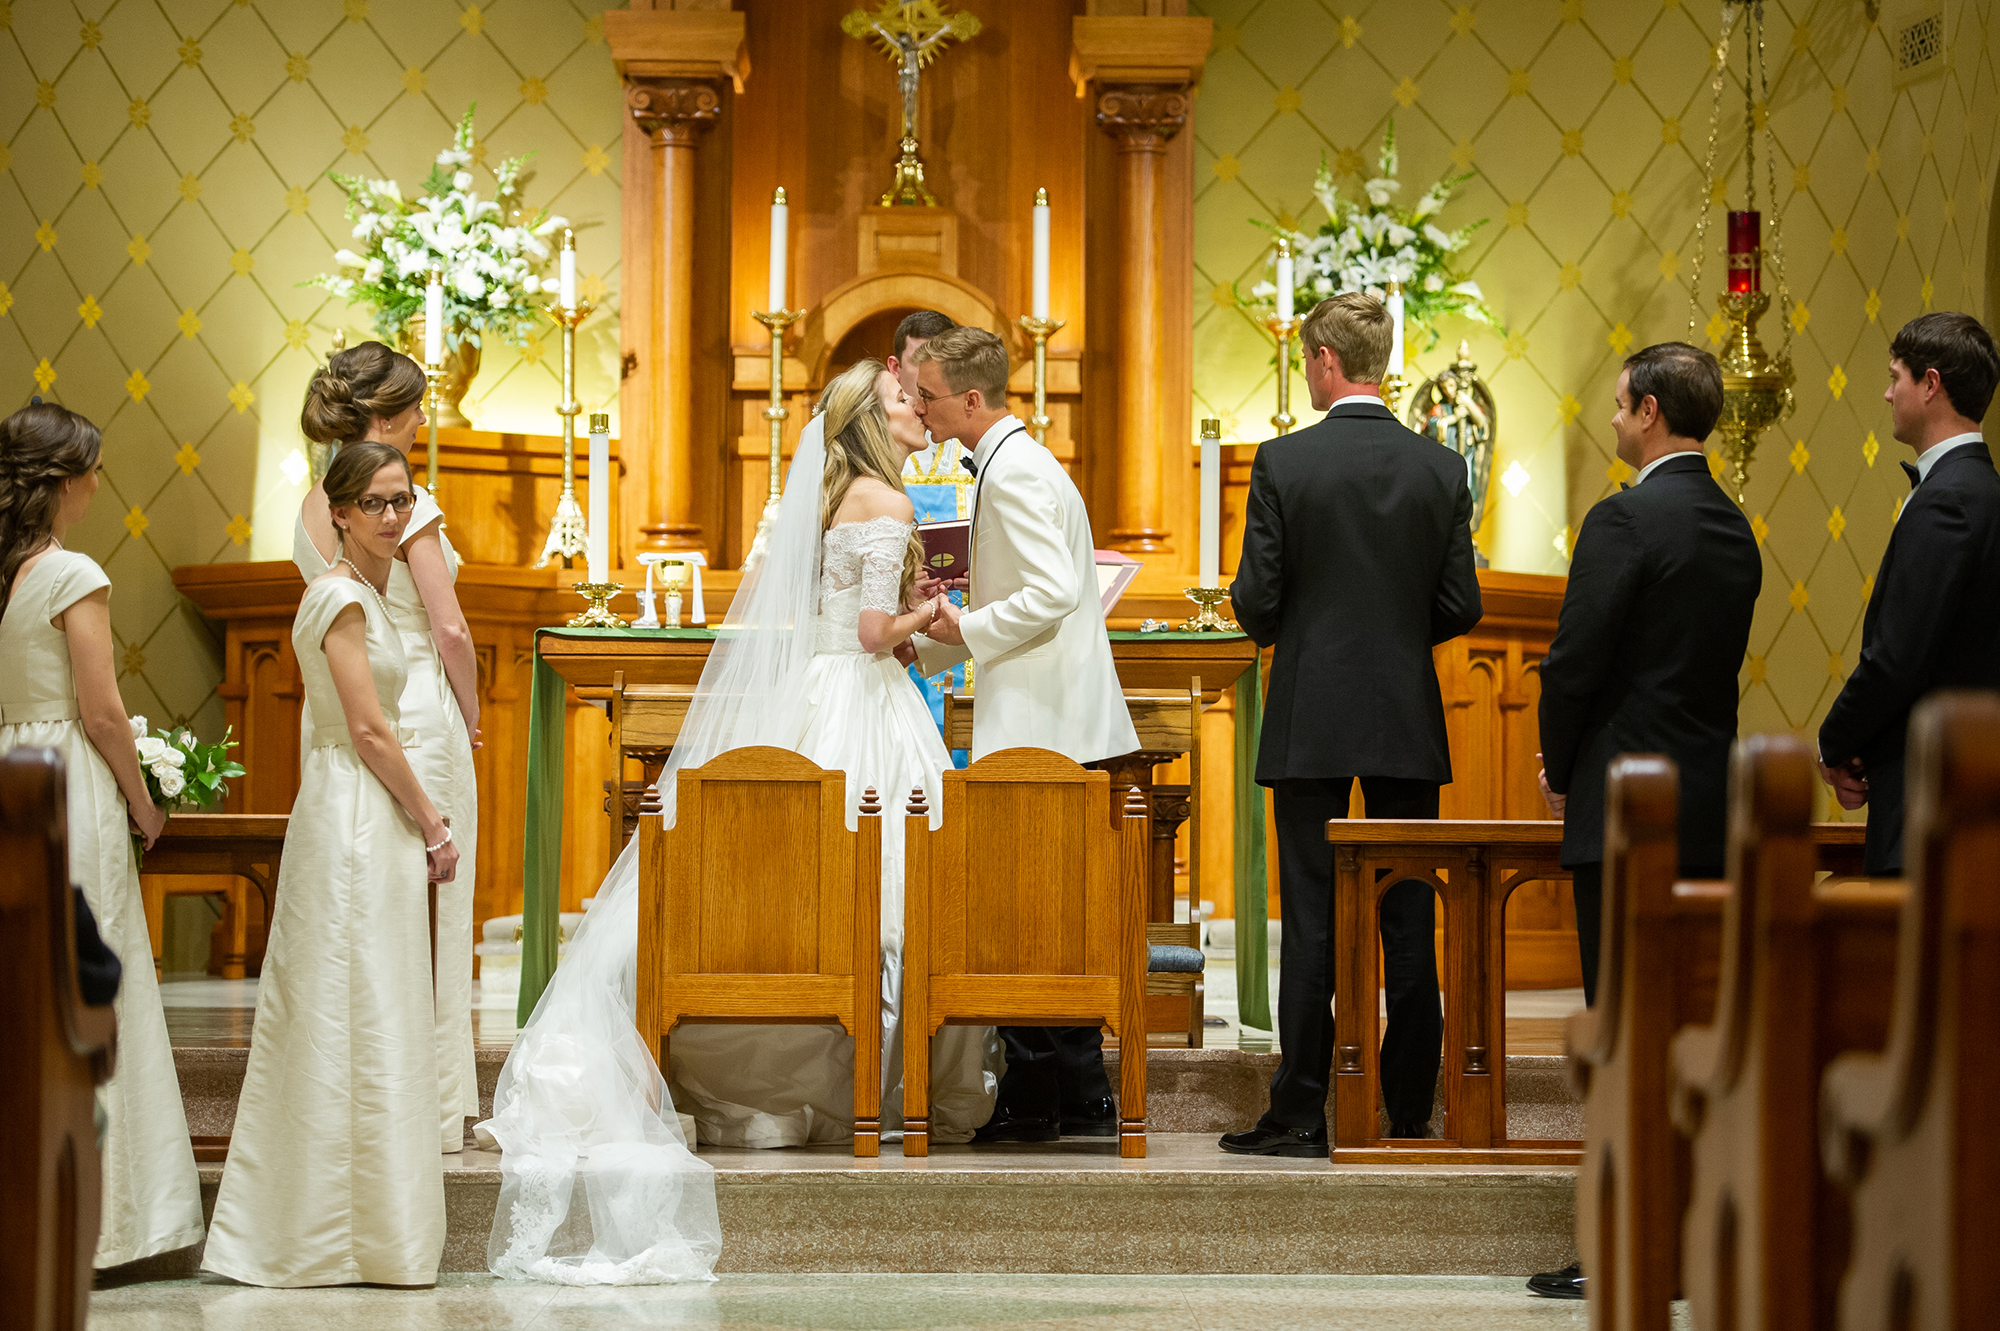 Bride and groom kissing at church wedding ceremony